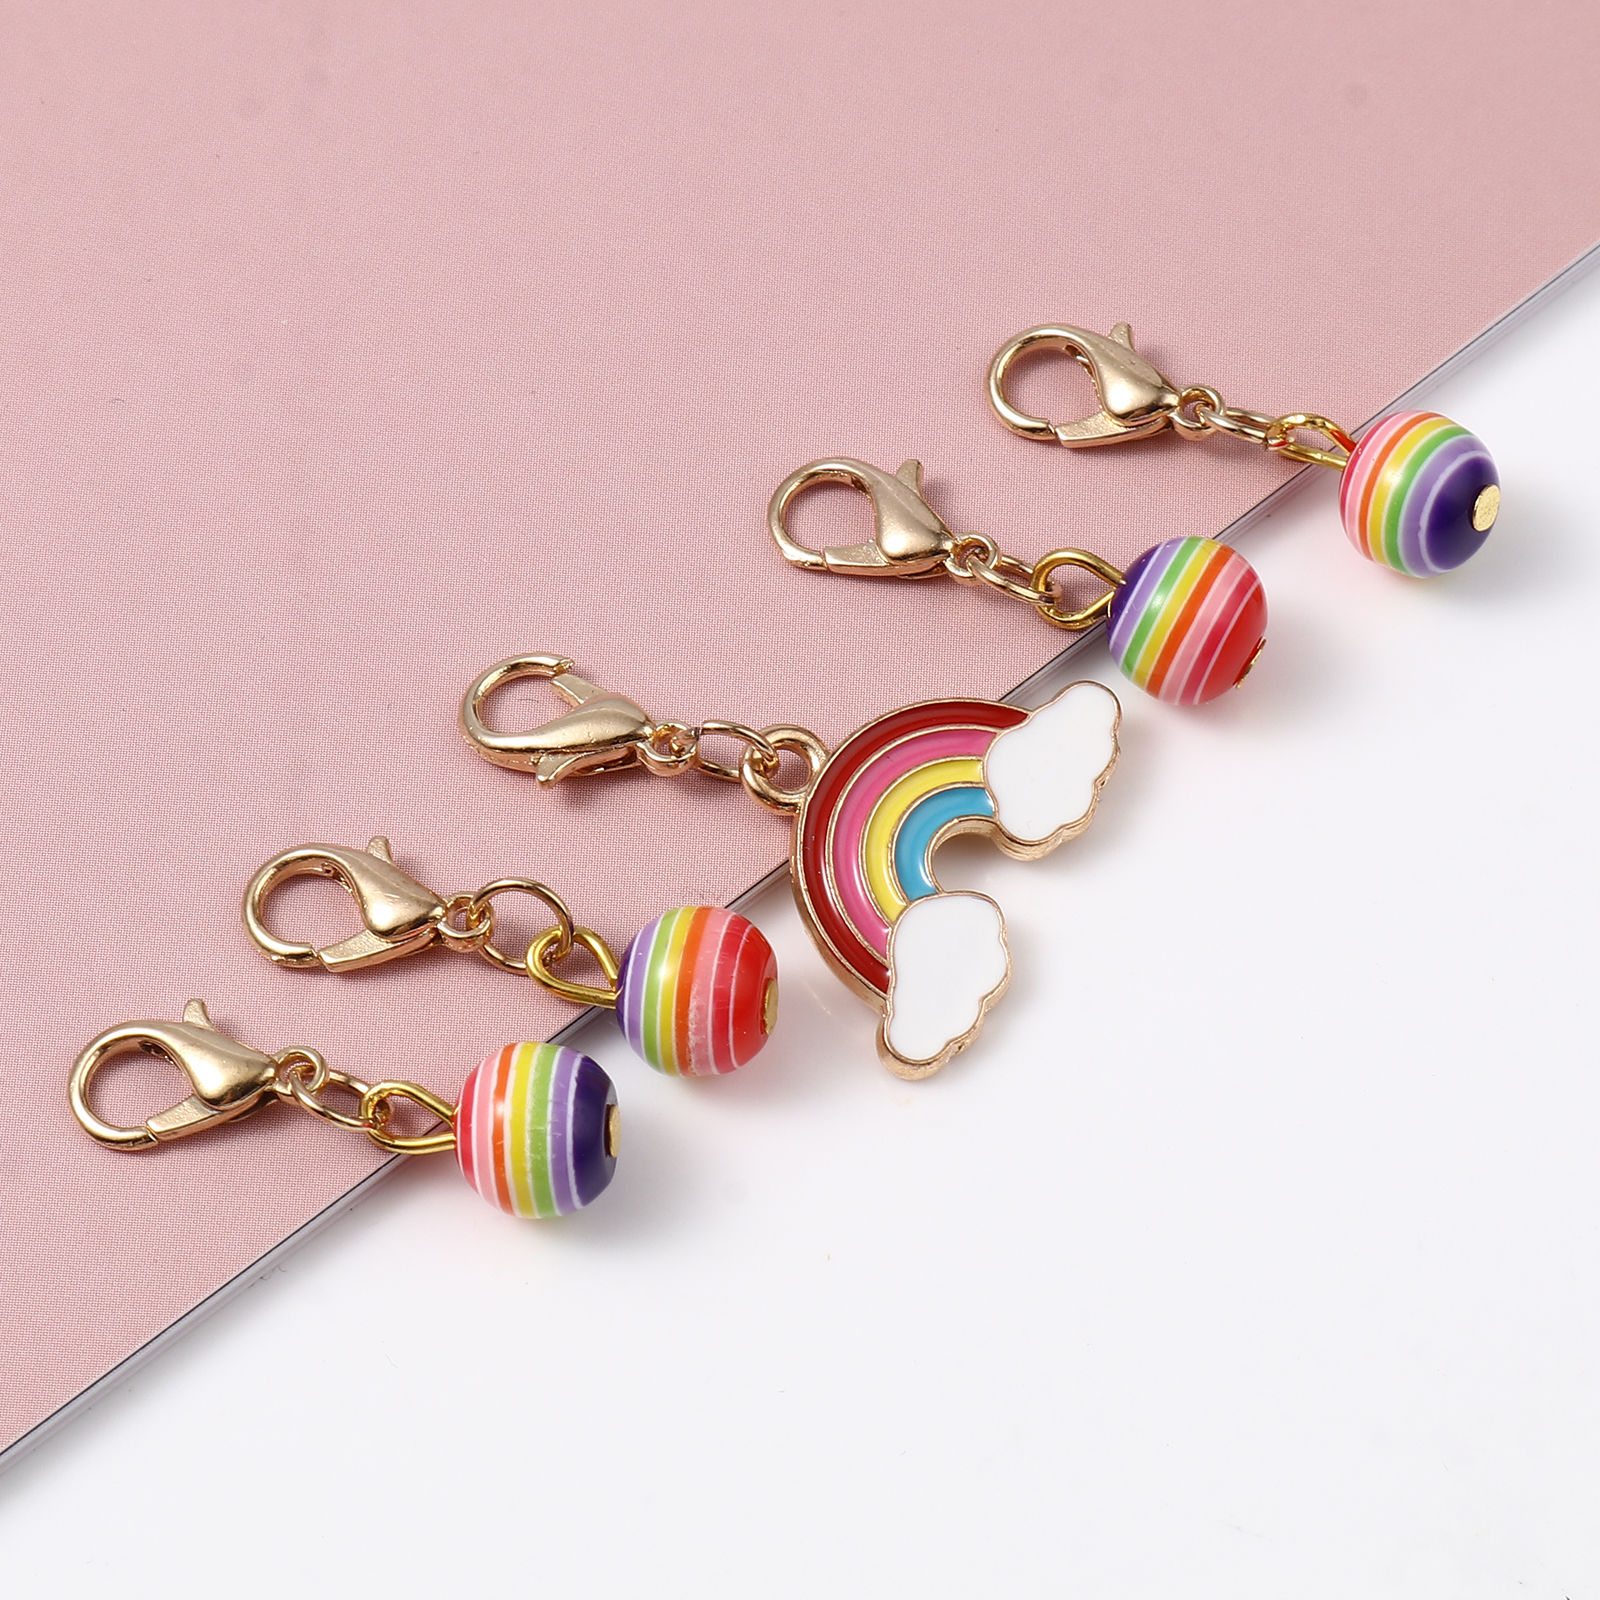 Picture of Doreenbox Zinc Based Alloy Weather Collection Knitting Stitch Markers Gold Plated Multicolor Rainbow Enamel 3cm x 2.3cm, 1 Set ( 5 PCs/Set)